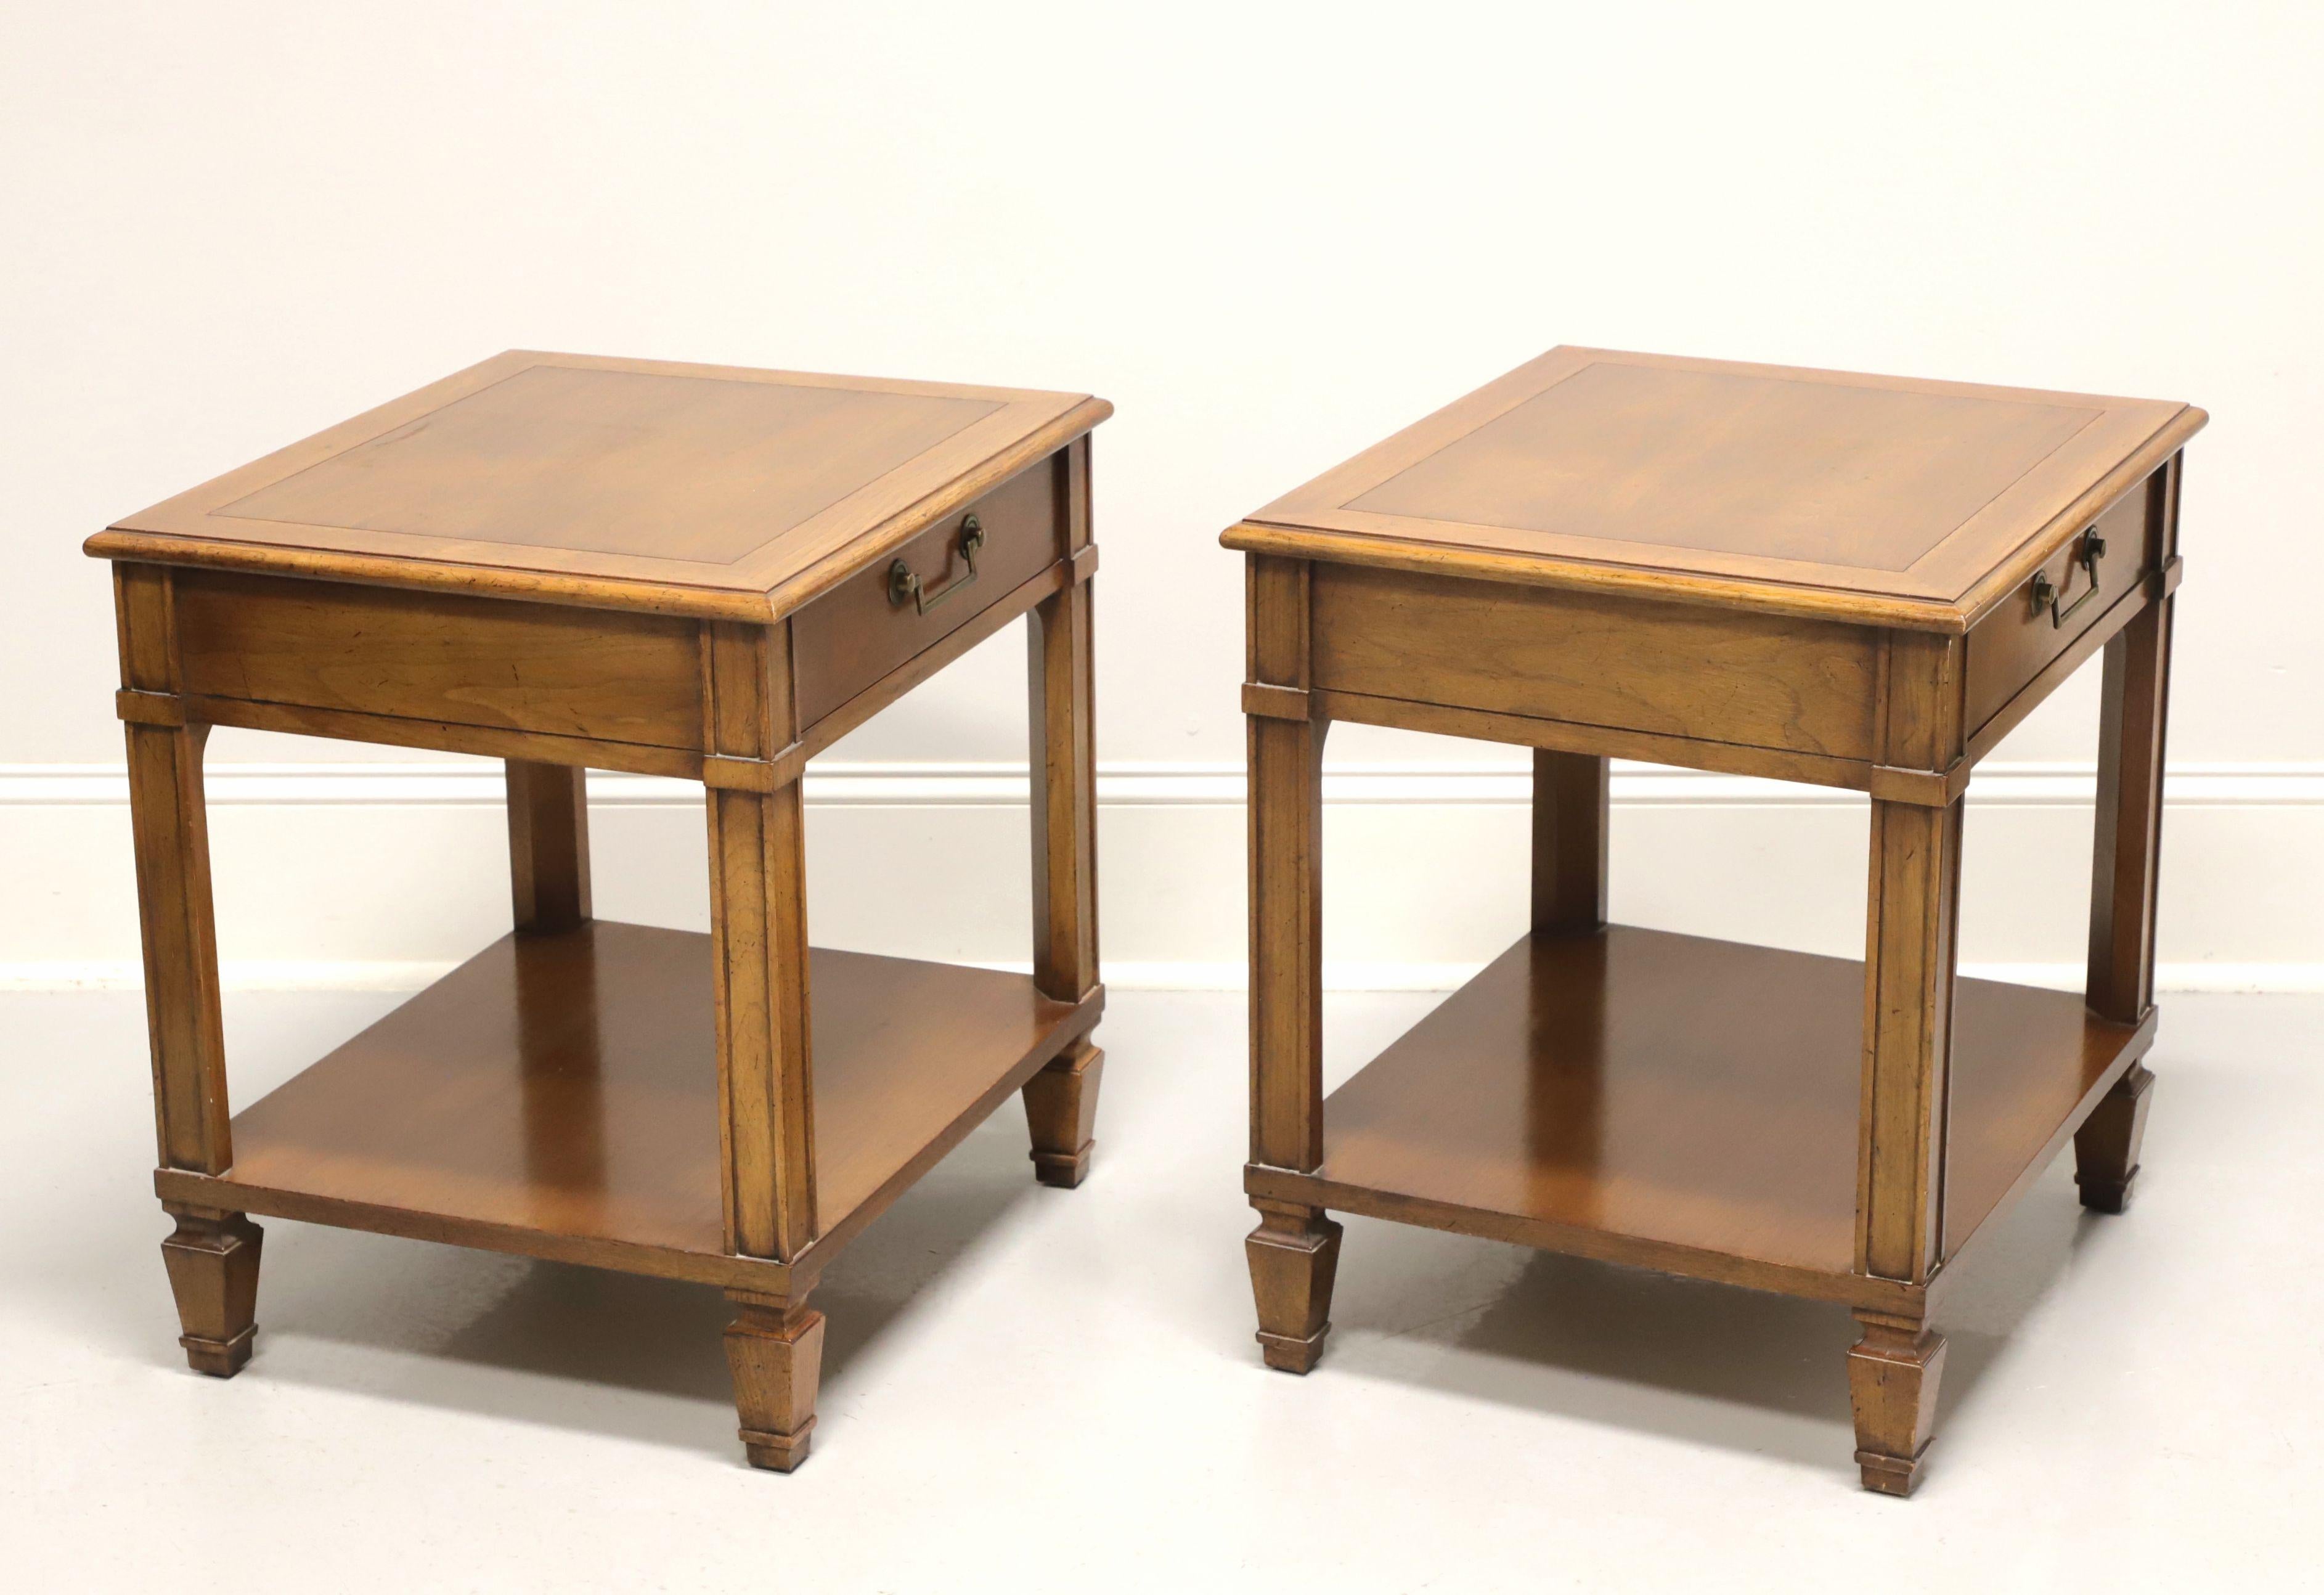 A pair of classic Mid Century style nightstands by Baker Furniture Company, for their Milling Road Division. Walnut with slightly distressed finish, banded top, brass hardware, column-like sides, undertier shelf and spade feet. Features one drawer